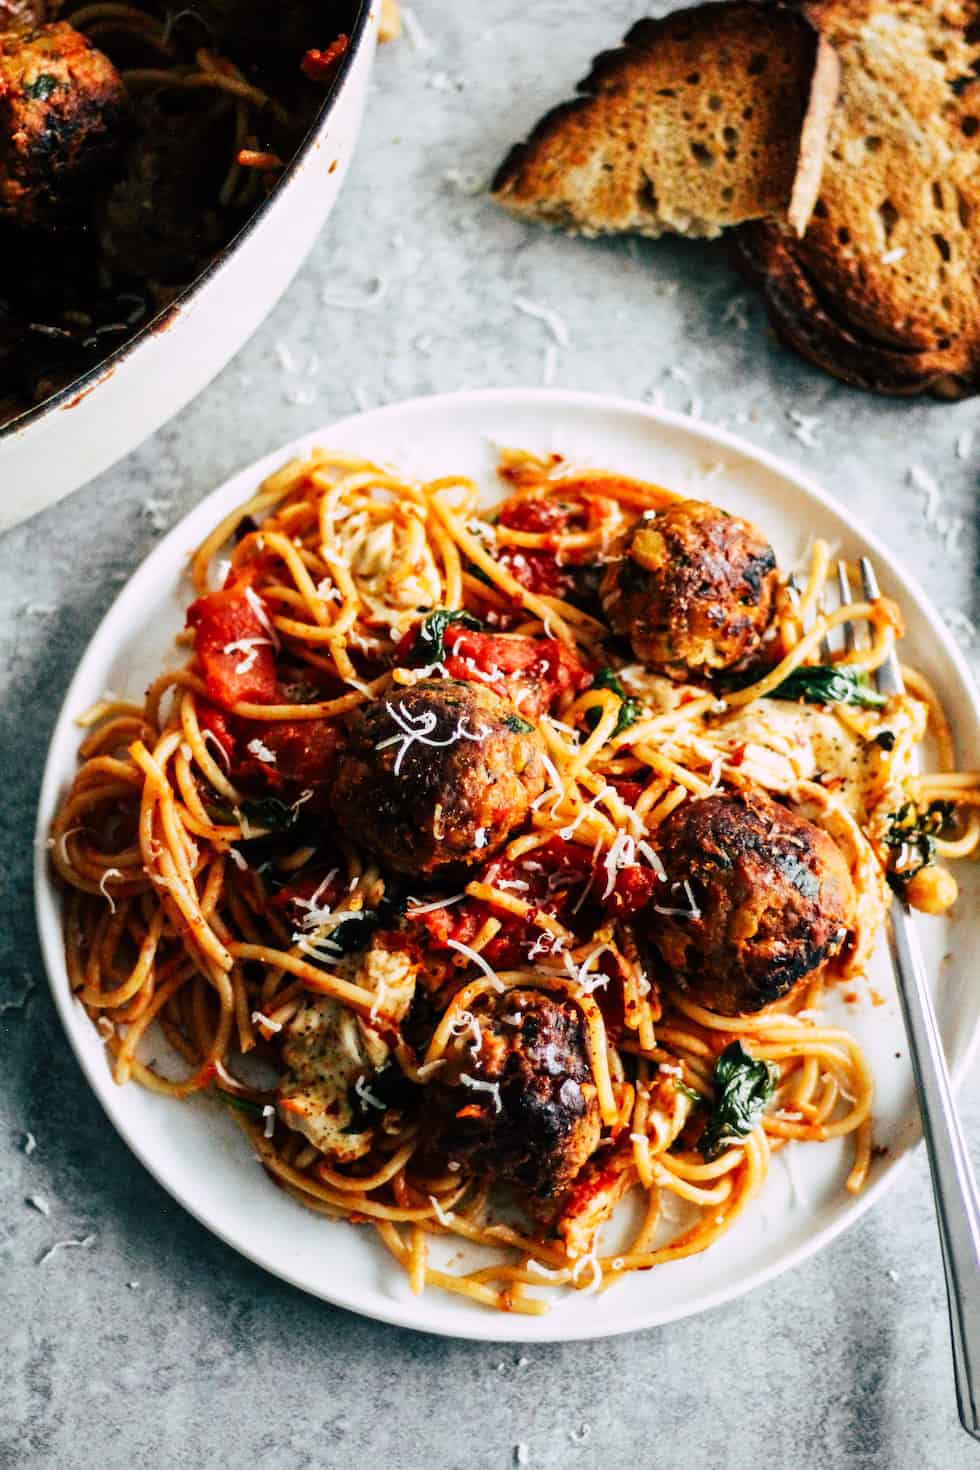 Spaghetti and meatballs on white plate with toasted bread in the background.